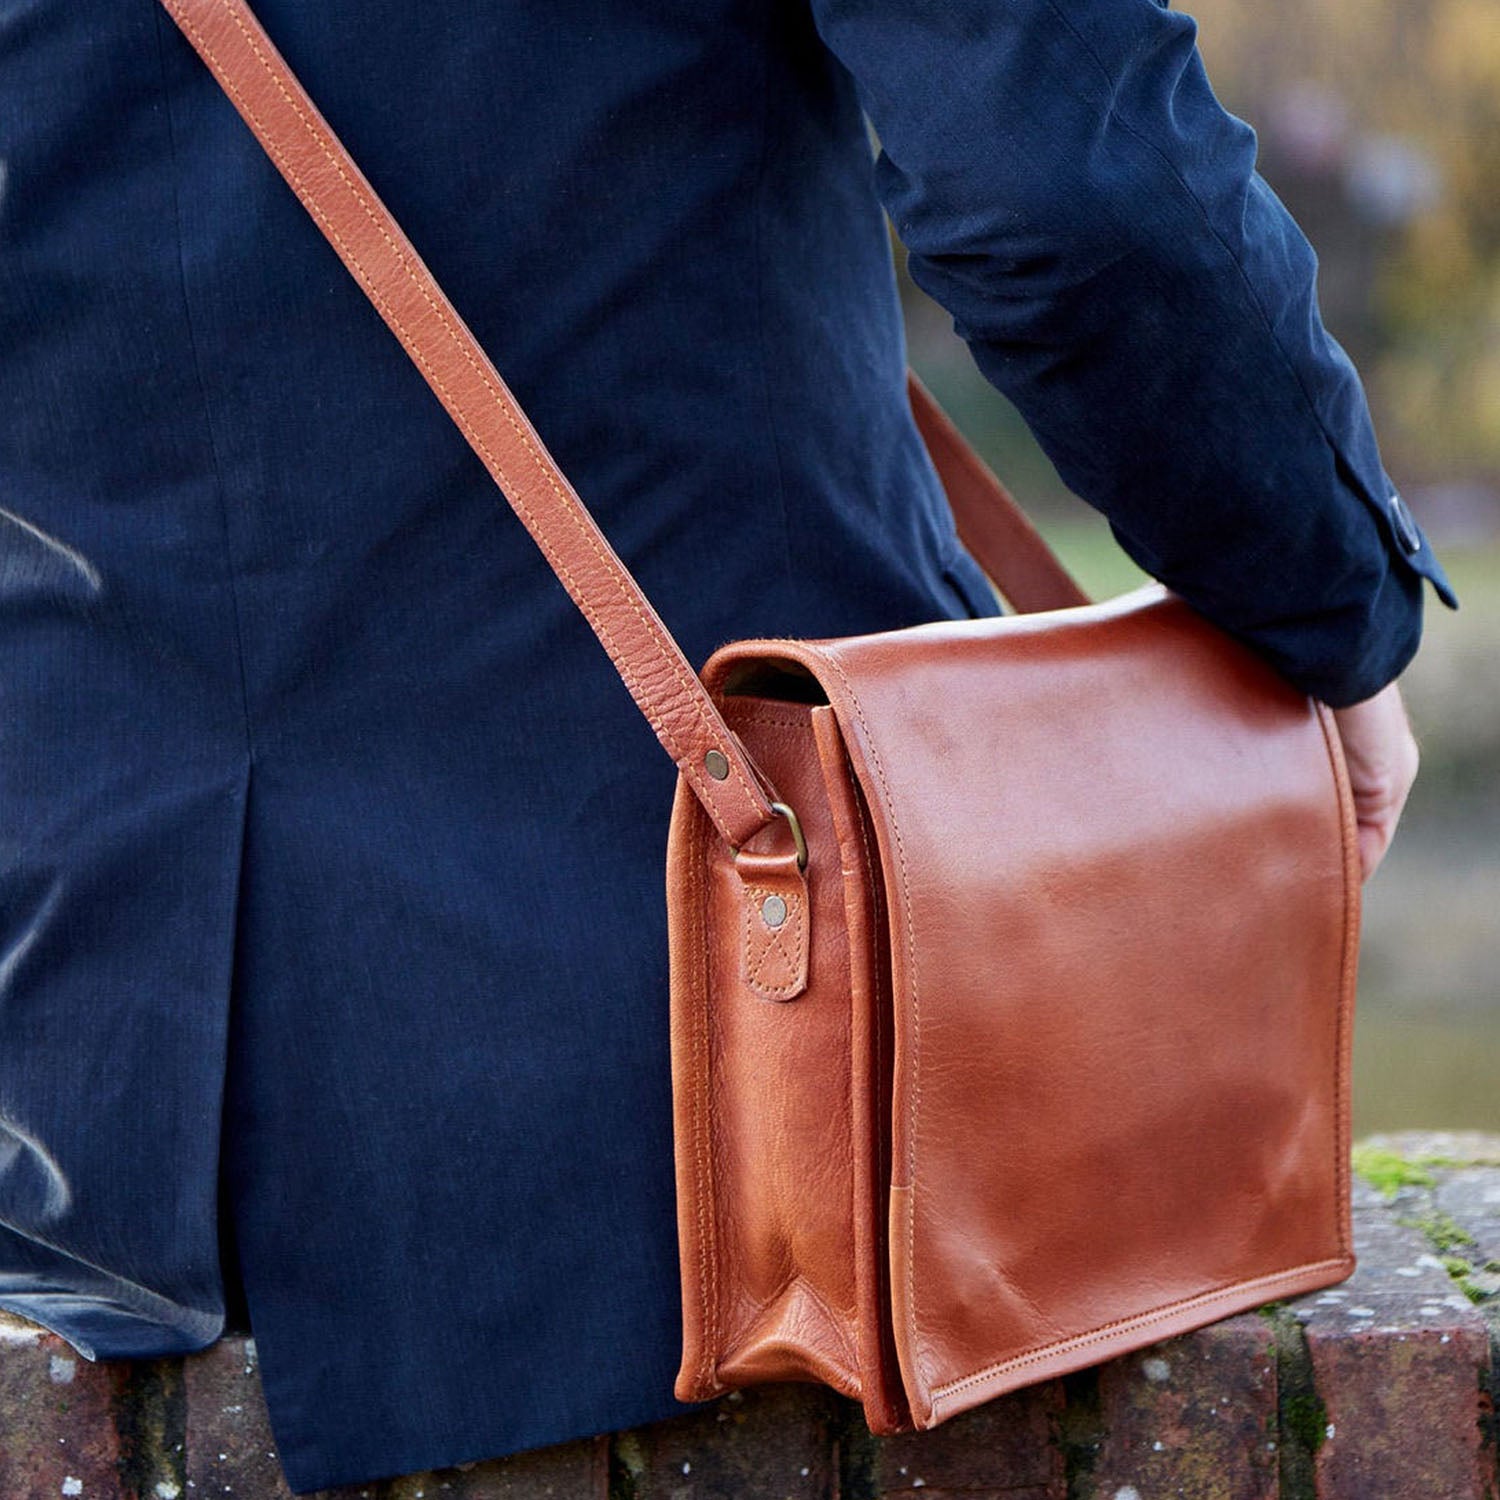 8 Best Travel Purses for Security & Organization - Savored Journeys